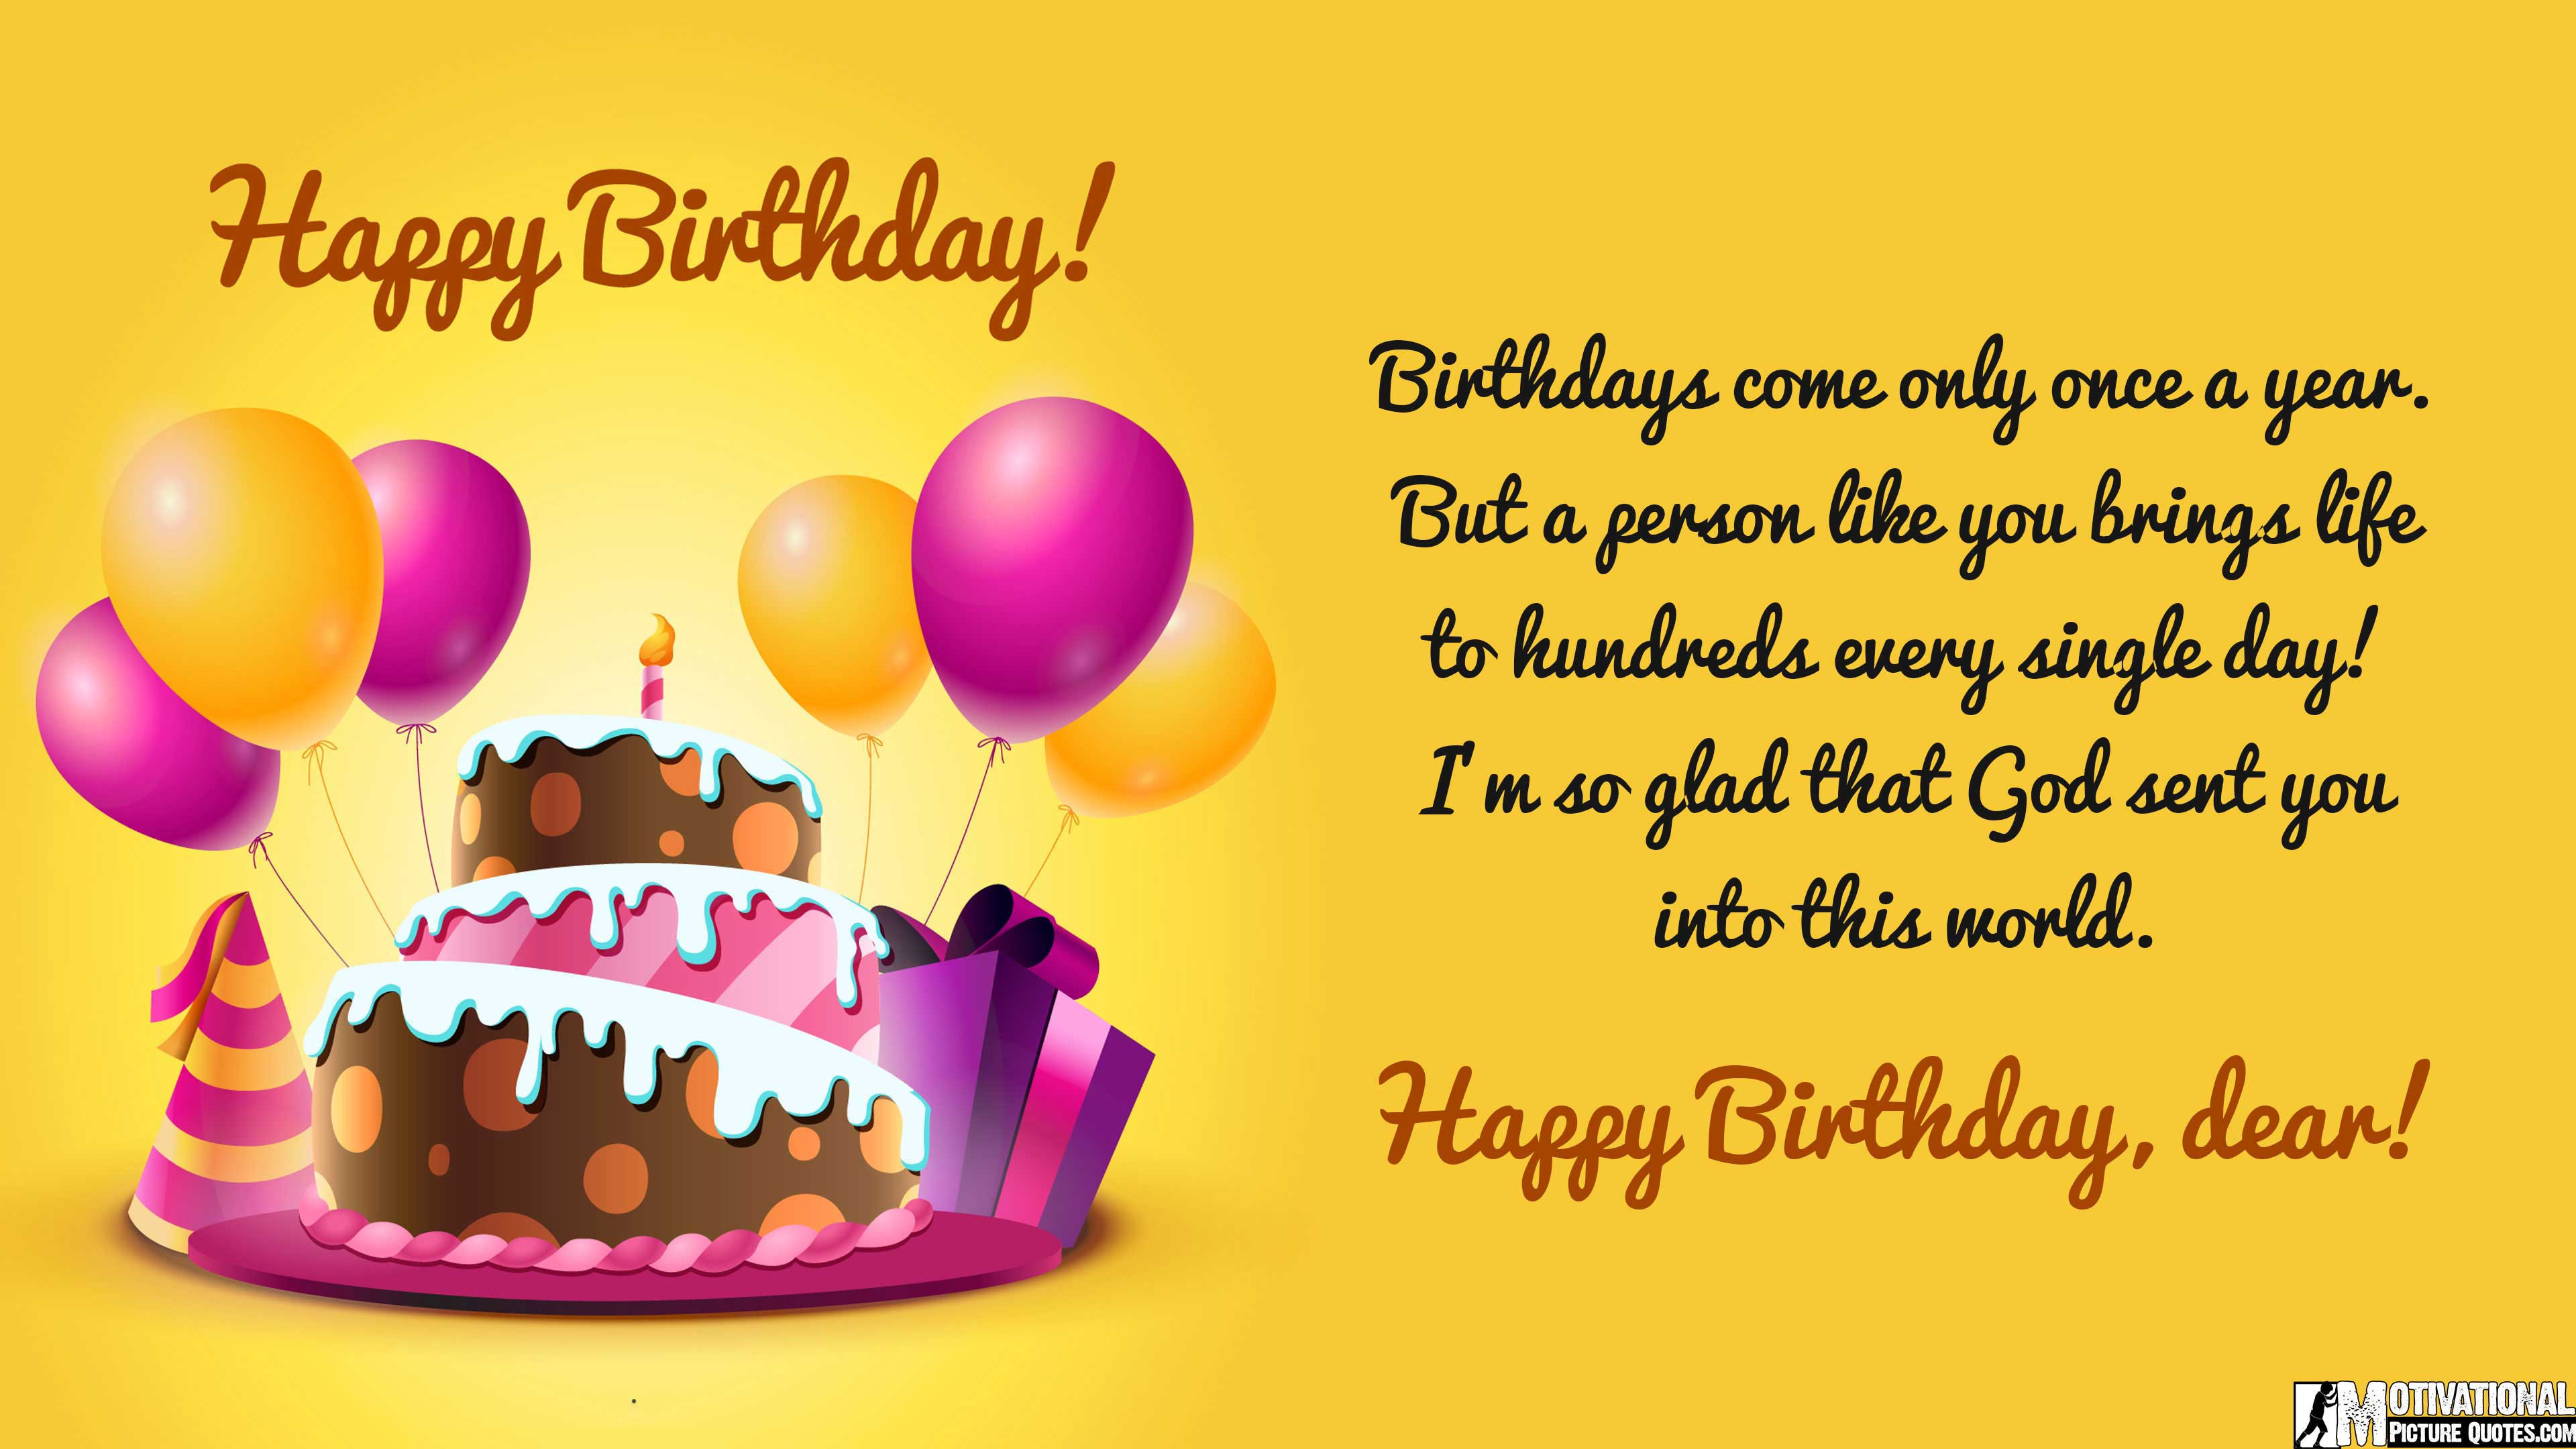 Best ideas about Happy Birthday Quotes
. Save or Pin 35 Inspirational Birthday Quotes Now.